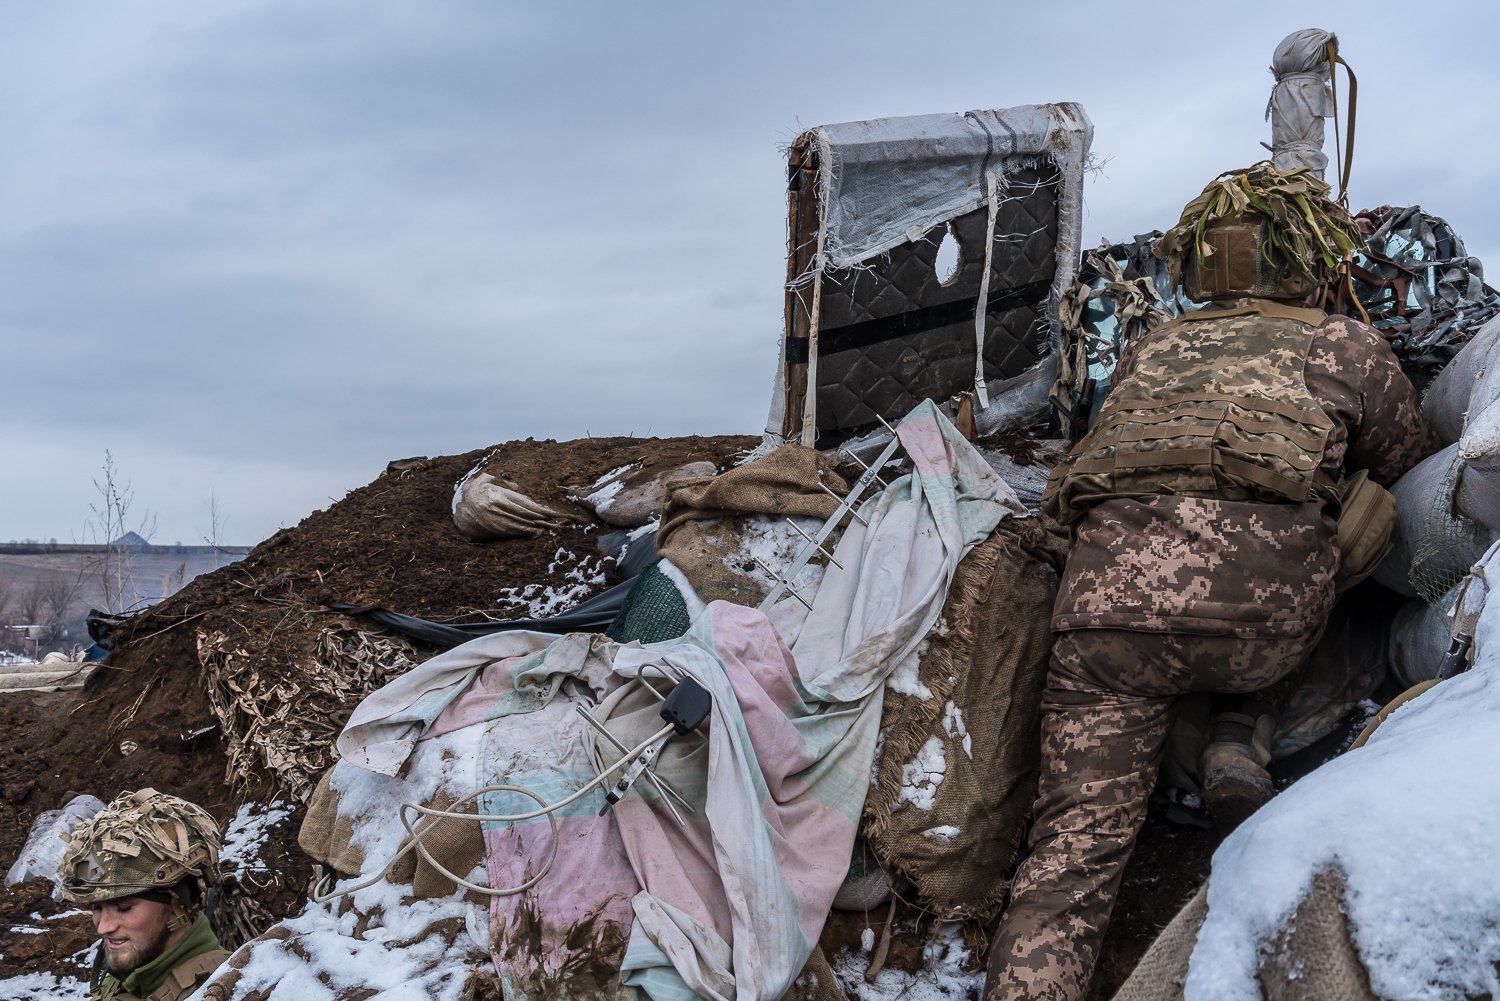  Pavlo (R), a Ukrainian soldier, uses a small hand-held periscope to view the positions of Russian-backed troops from a small bunker near on the front line on January 17, 2022 in the village of New York, formerly known as Novhorodske, Ukraine. 